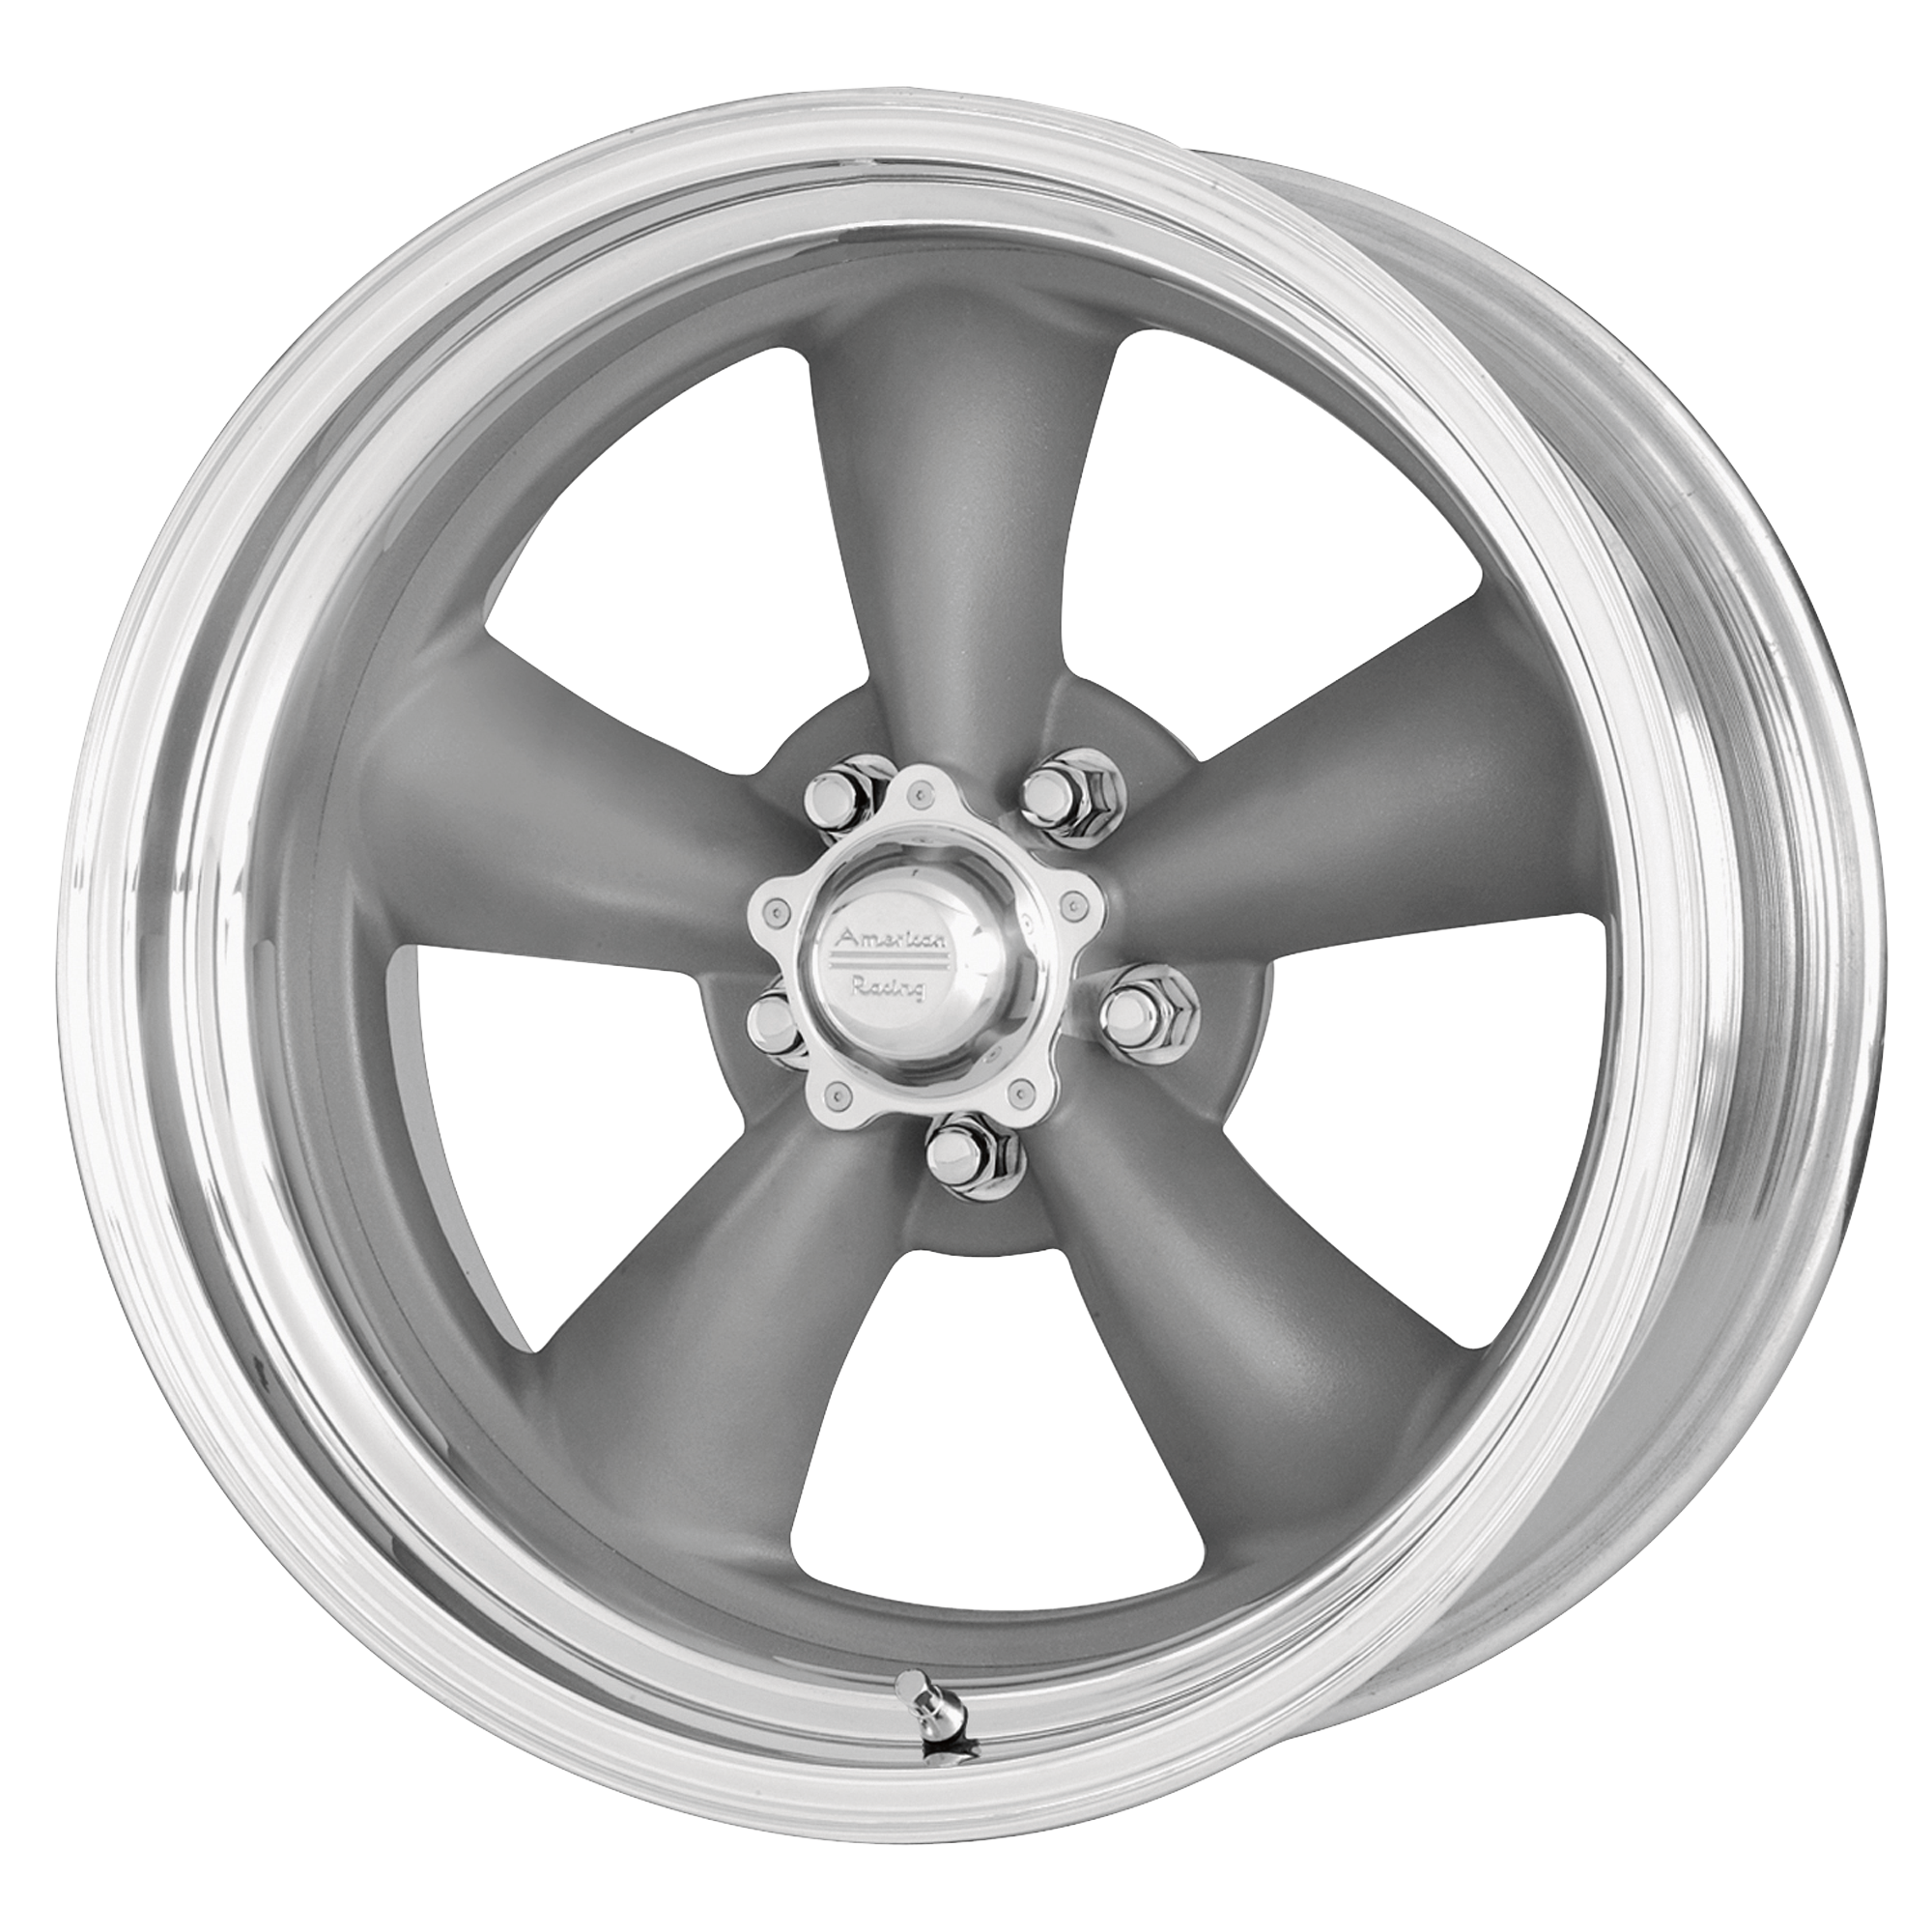 CLASSIC TORQ THRUST II ONE PIECE 15x4 5x120.65 MAG GRAY W/ MACHINED LIP (-25 mm) - Tires and Engine Performance